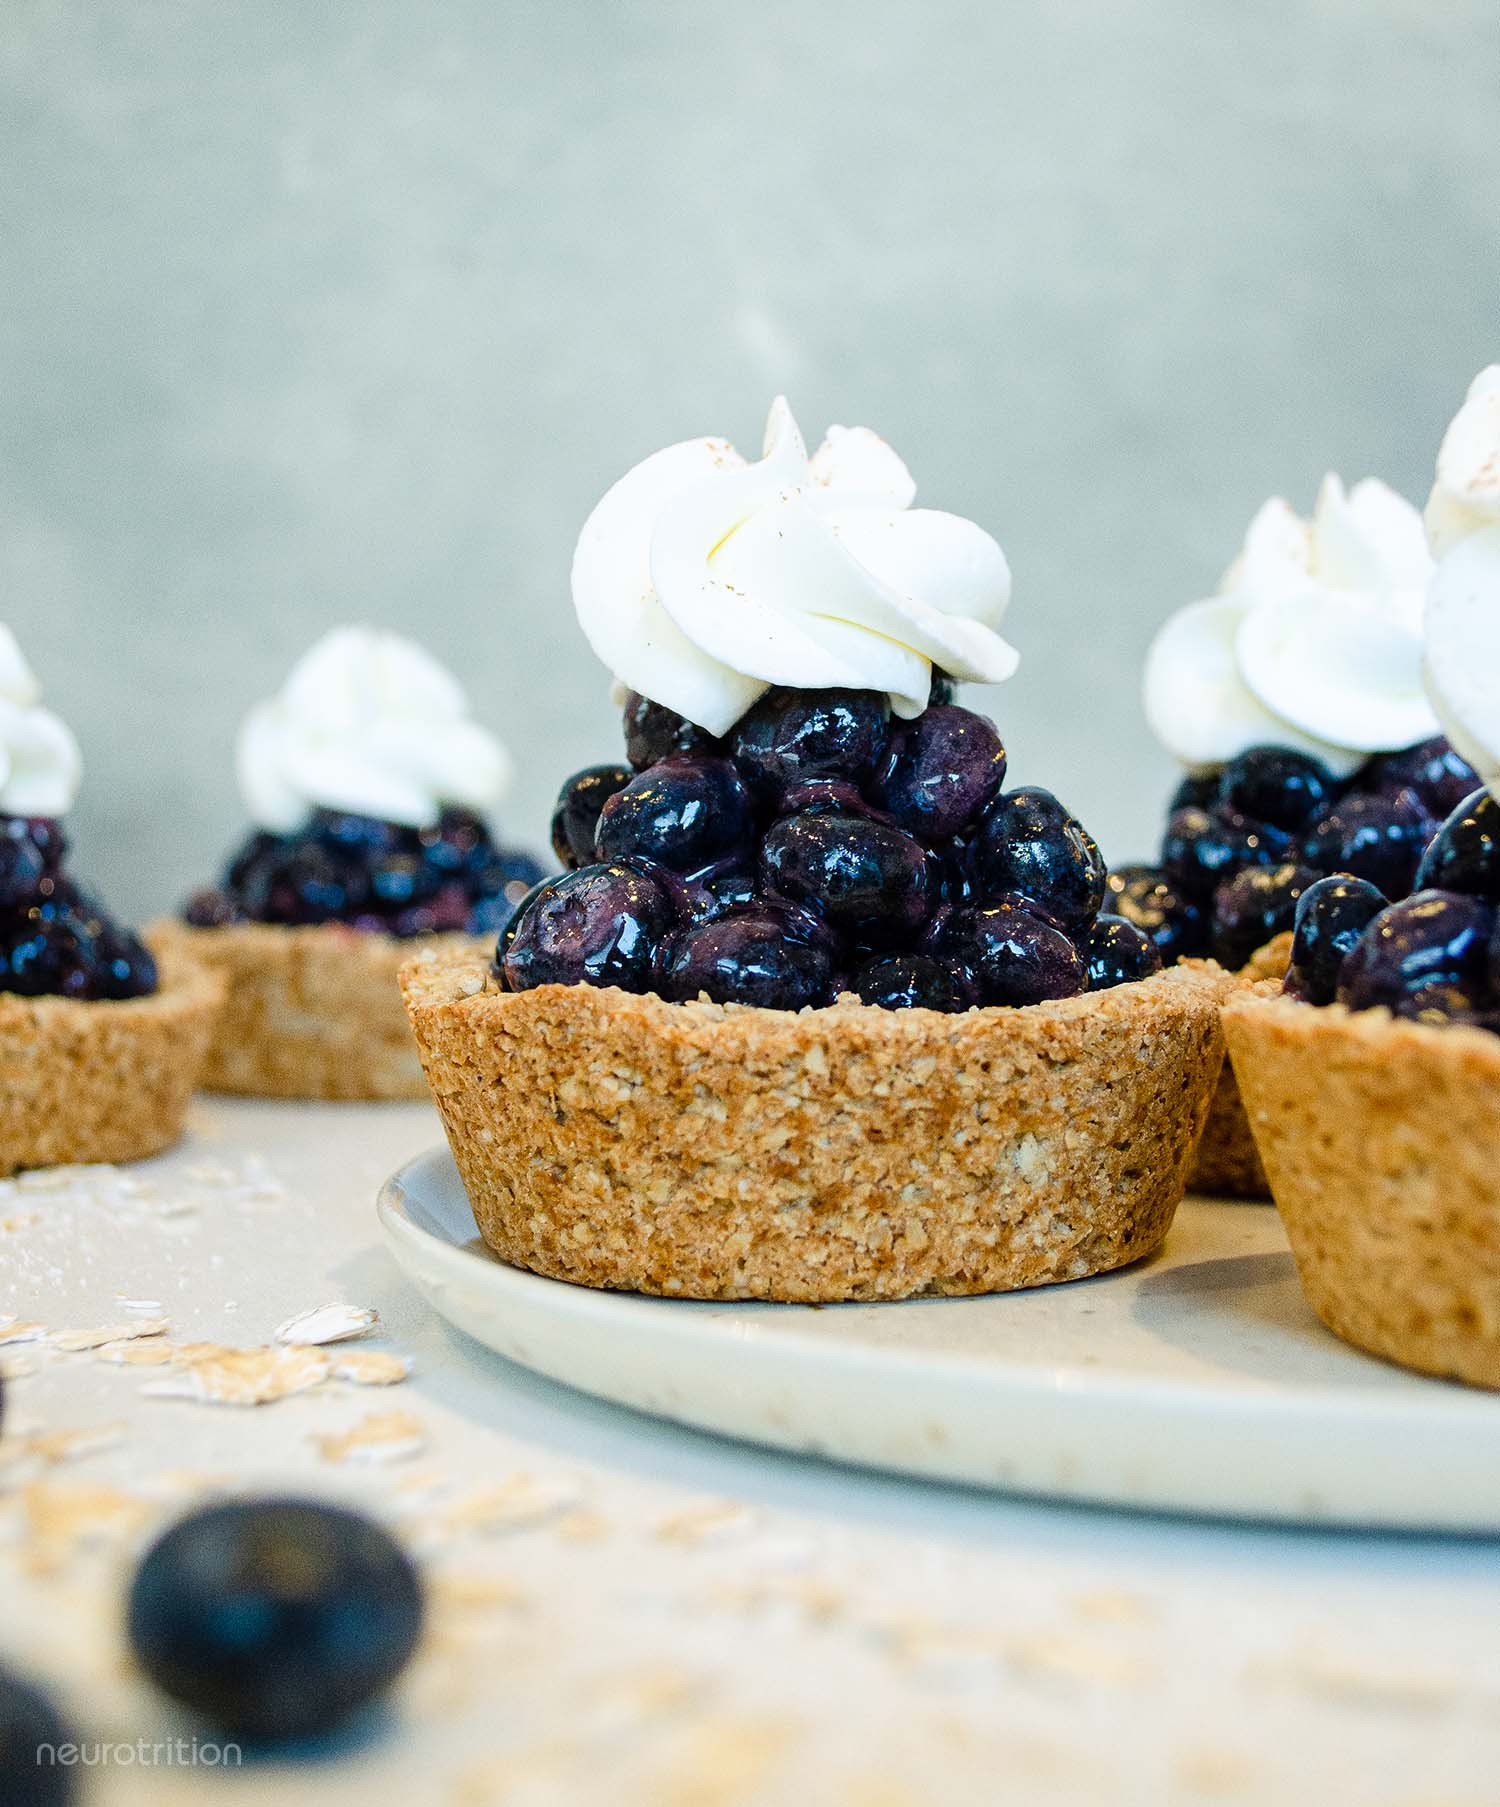 A group of mini blueberry pies with a dollop of whip cream on top of each.